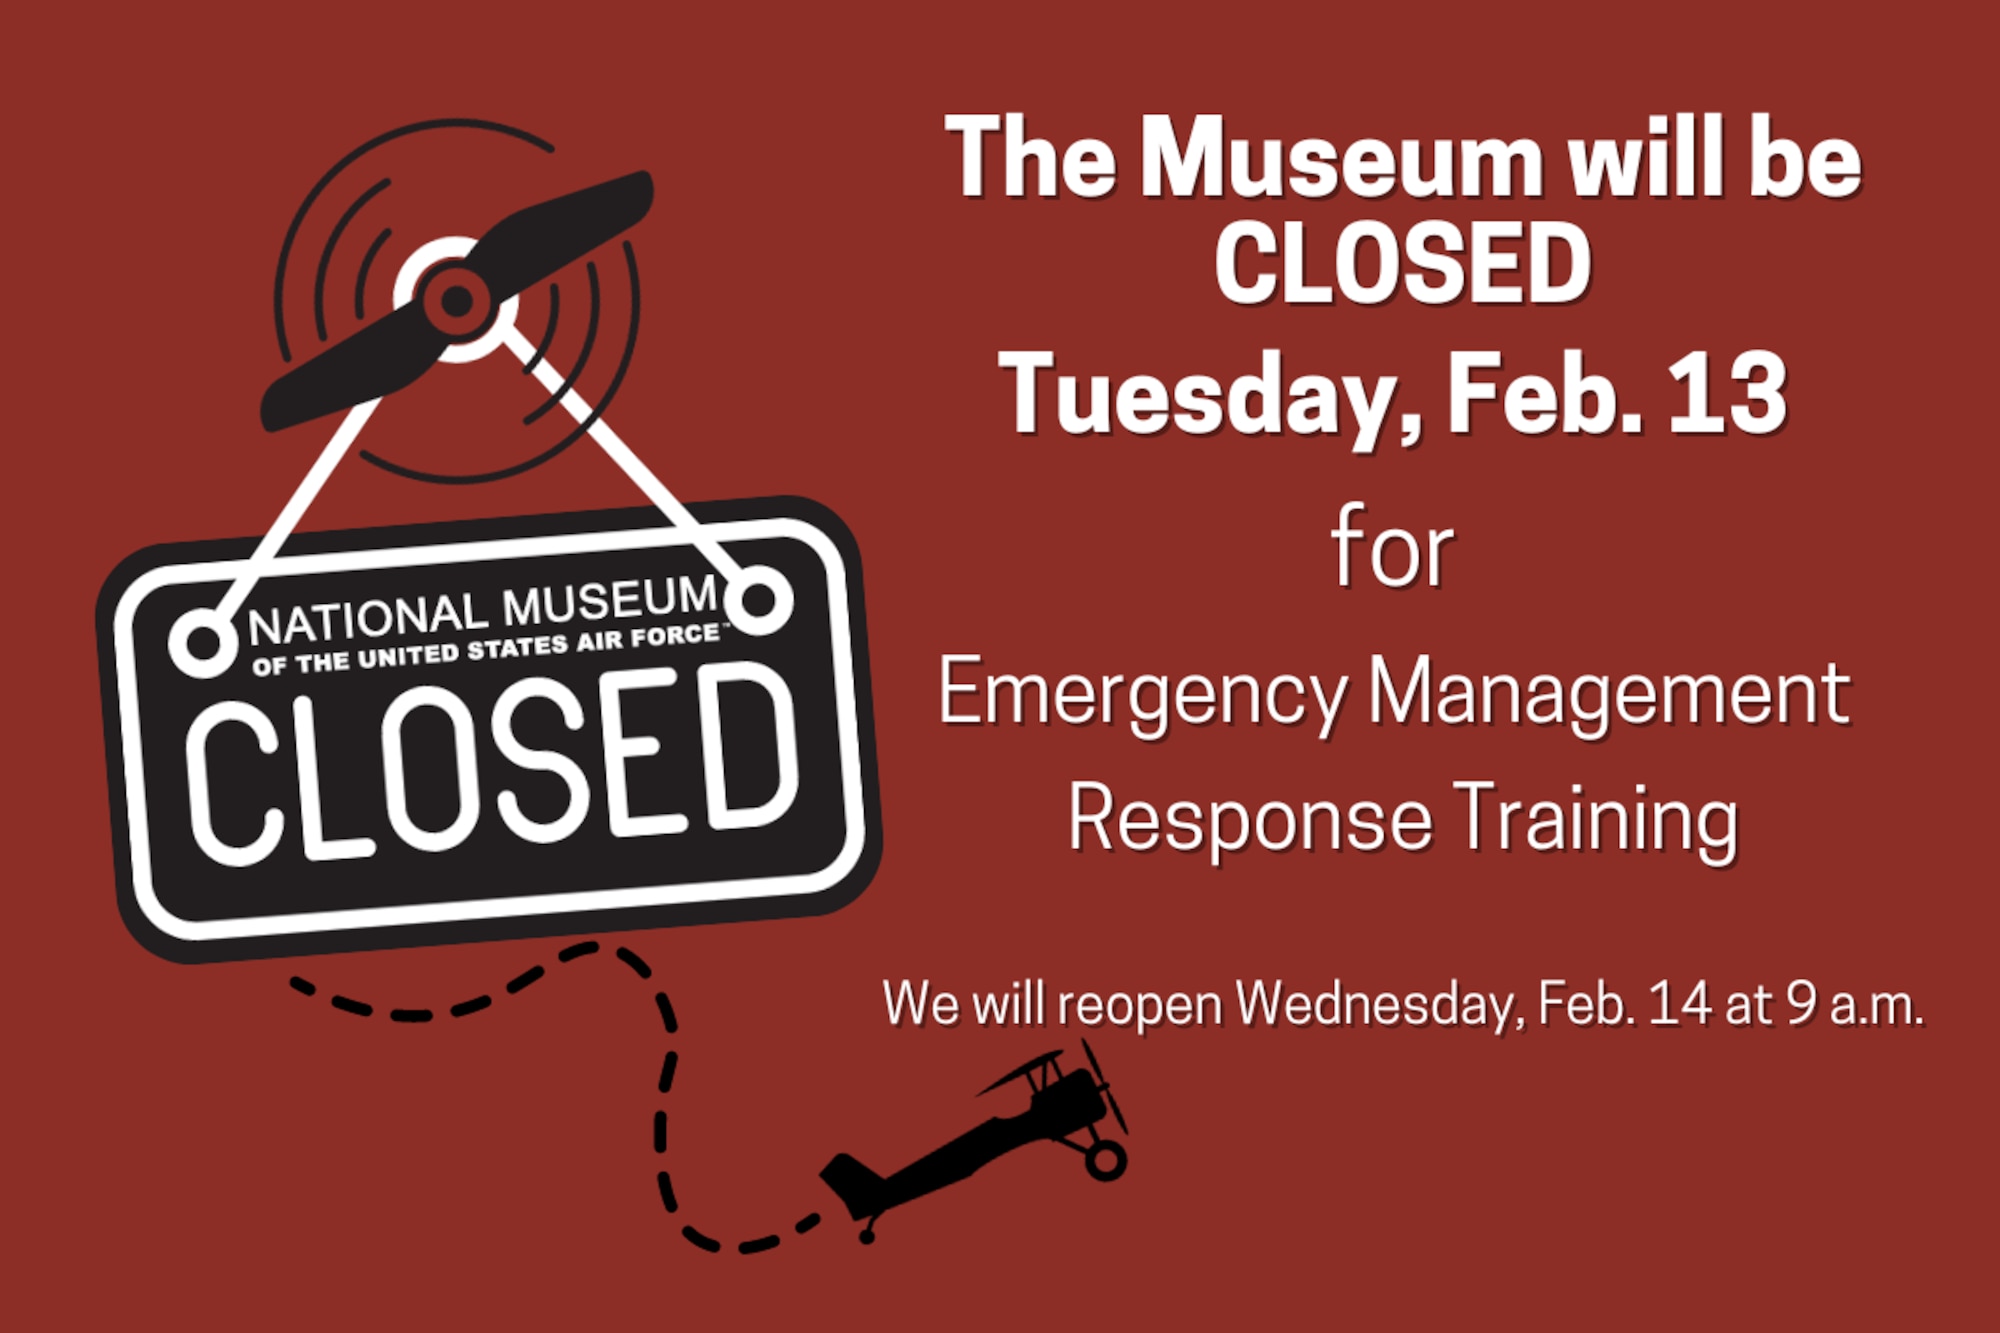 The Museum will be closed Tuesday, Feb. 13 for Emergency Management Response Training. We will reopen Wednesday, Feb. 14 at 9 a.m..
Red background with a black Closed sign hanging from a propeller.